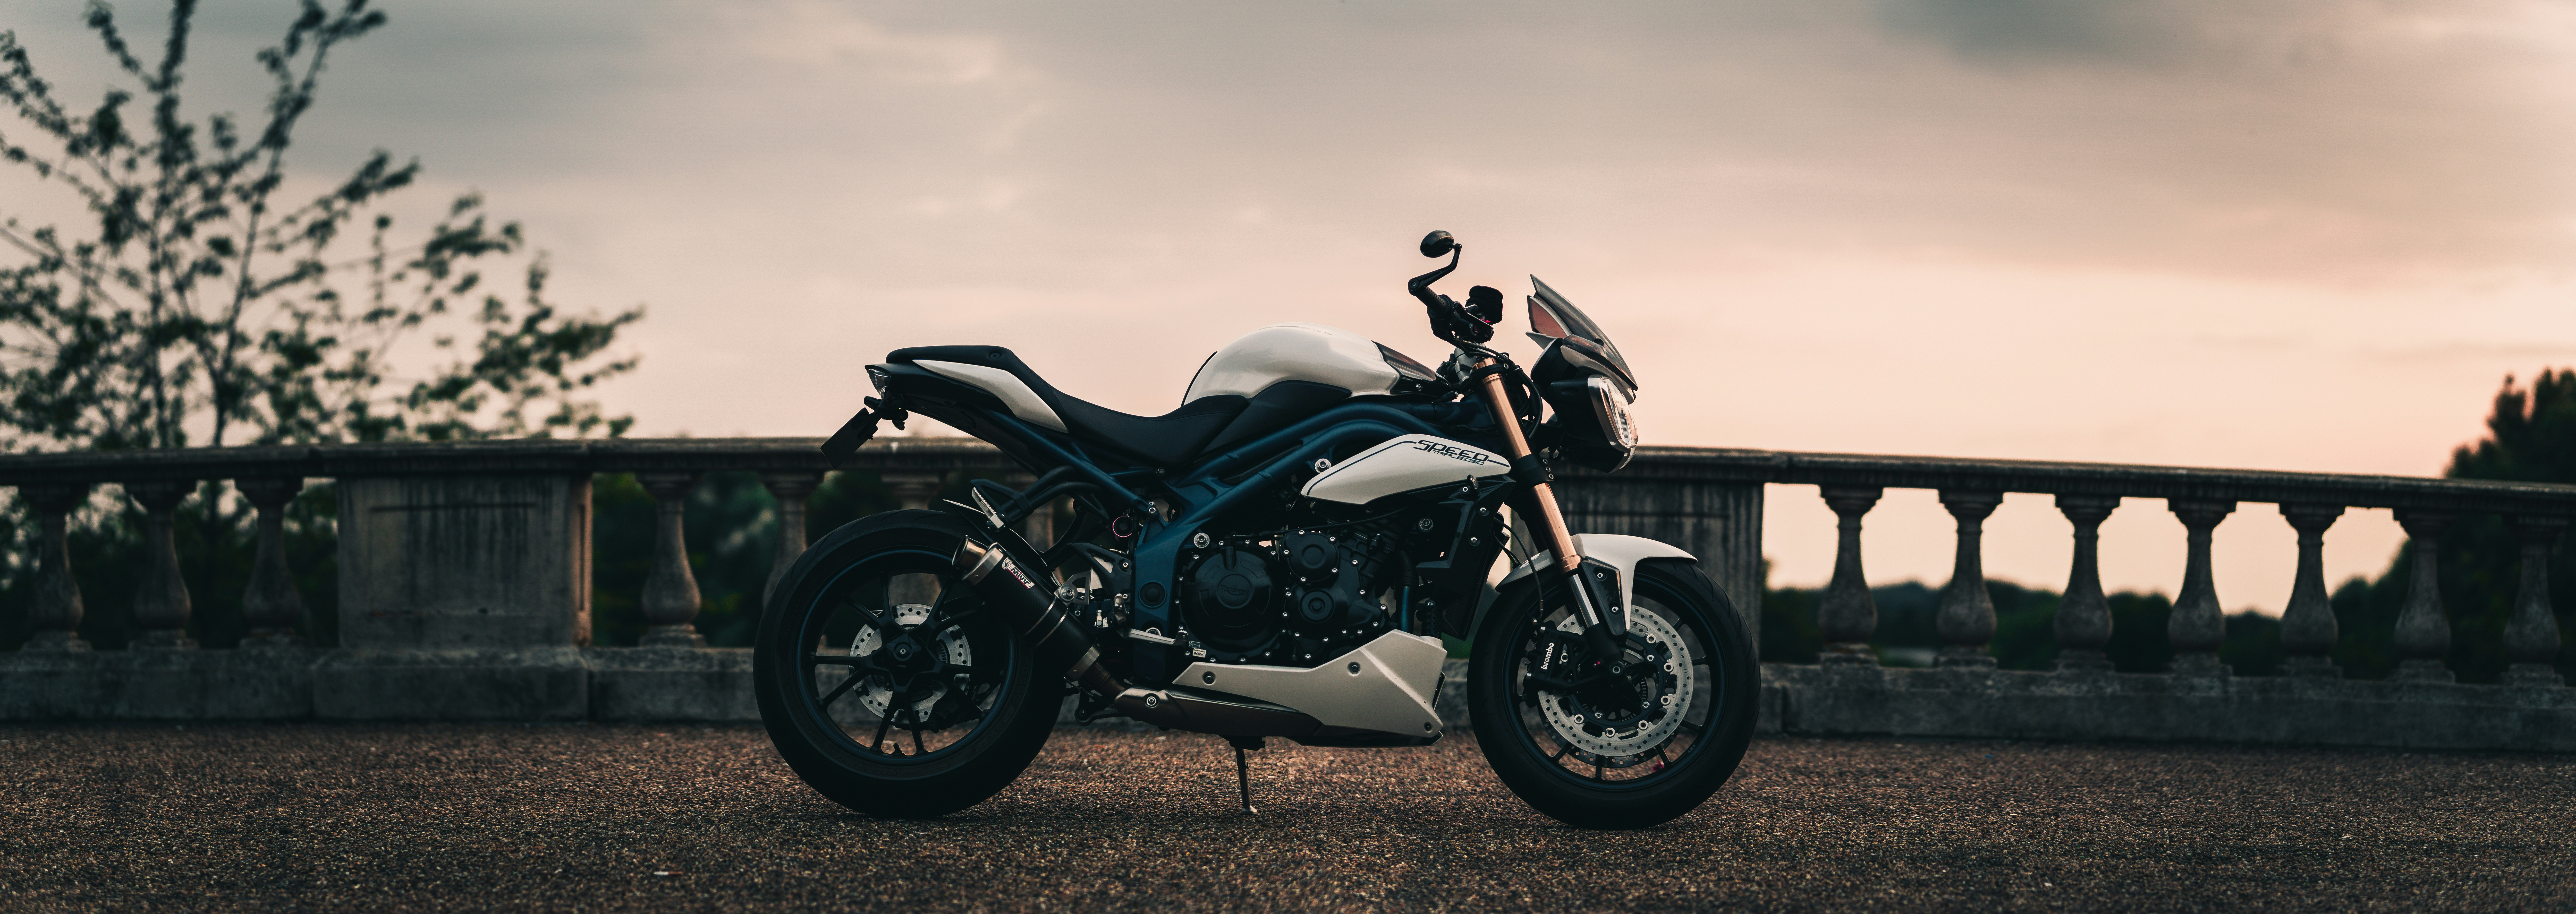 Panoramic photo of a Triumph Speed Triple motorcycle in a scenic park at sunset